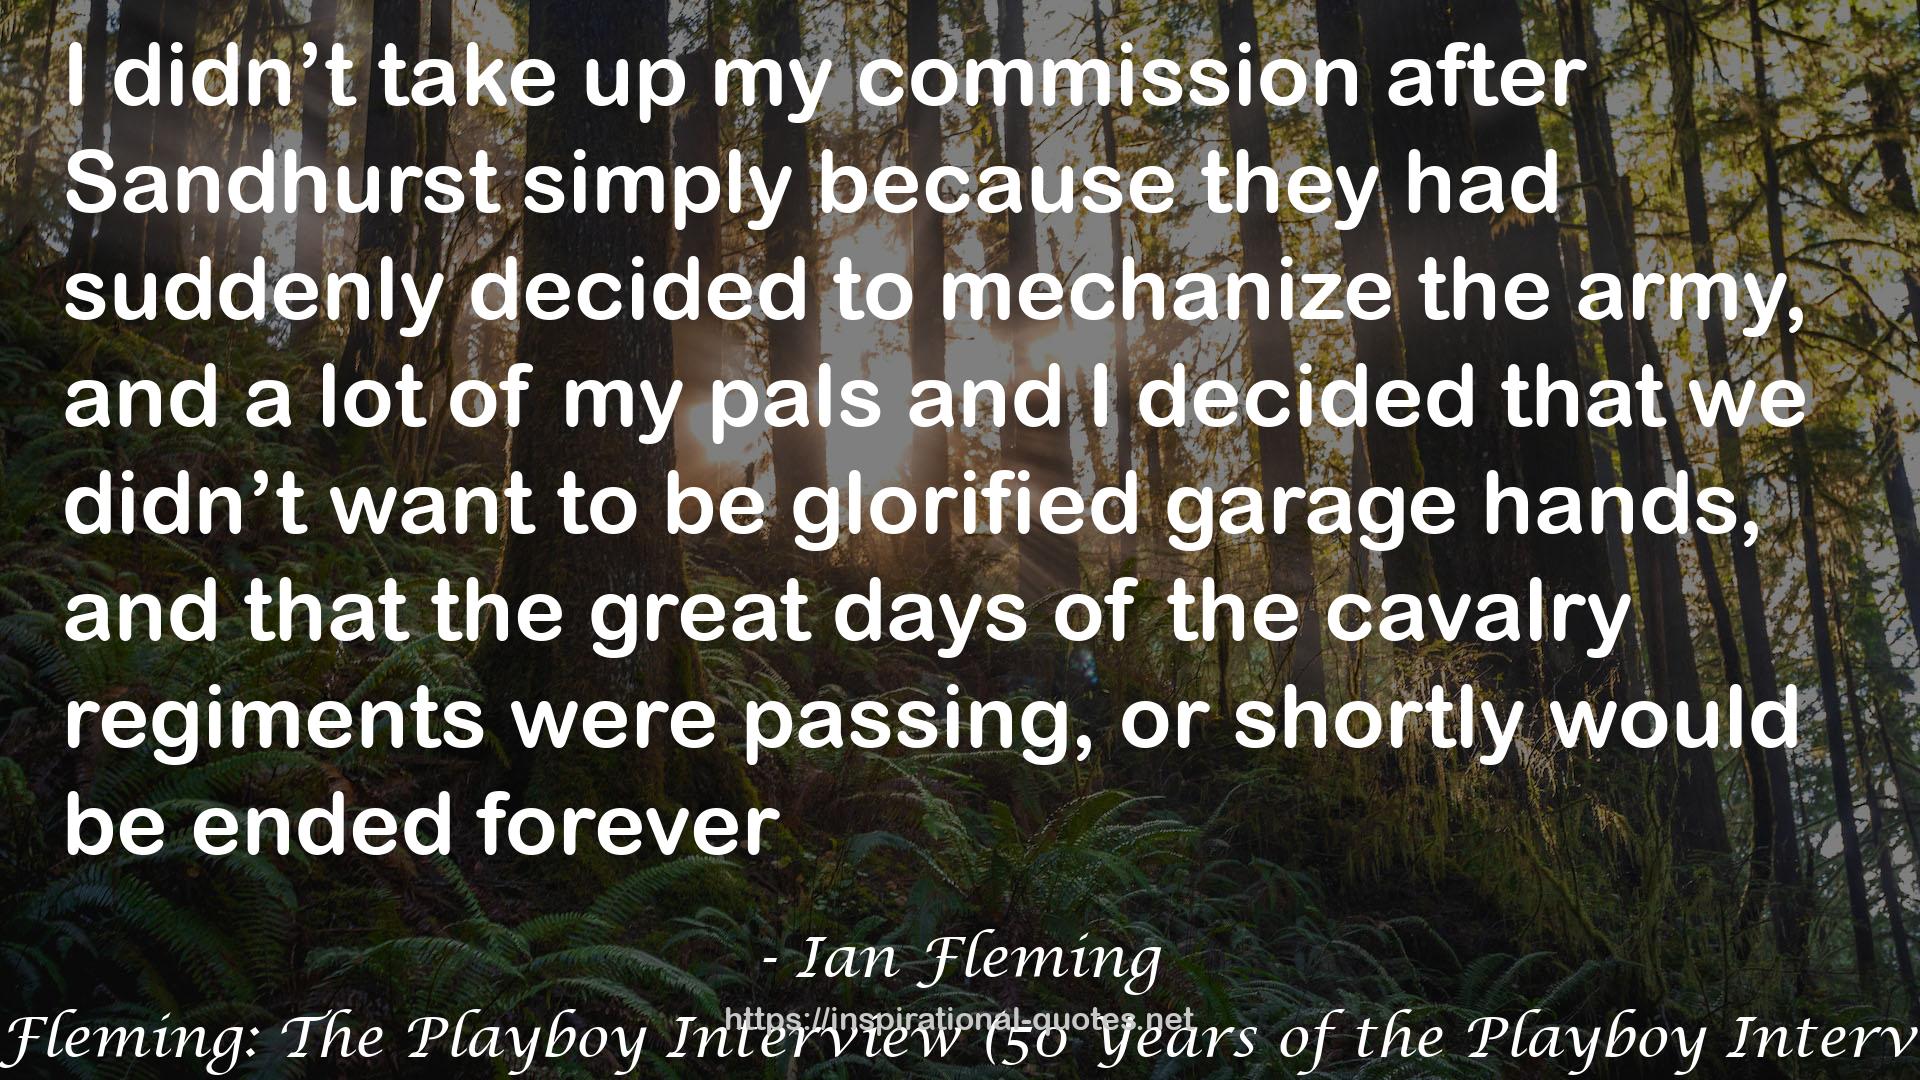 Ian Fleming: The Playboy Interview (50 Years of the Playboy Interview) QUOTES